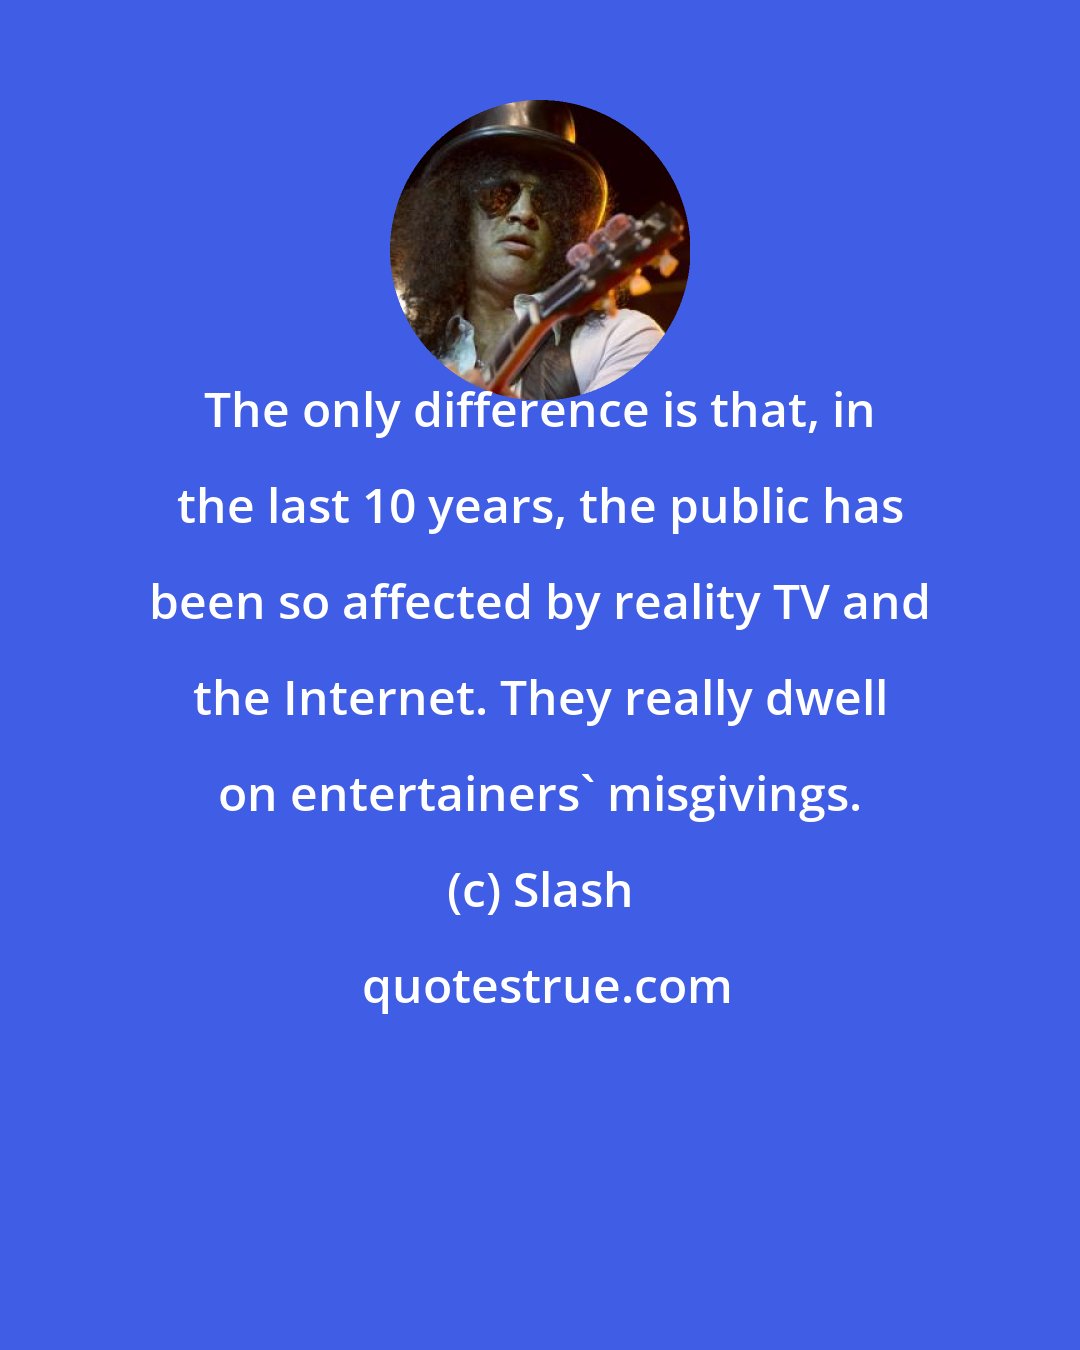 Slash: The only difference is that, in the last 10 years, the public has been so affected by reality TV and the Internet. They really dwell on entertainers' misgivings.